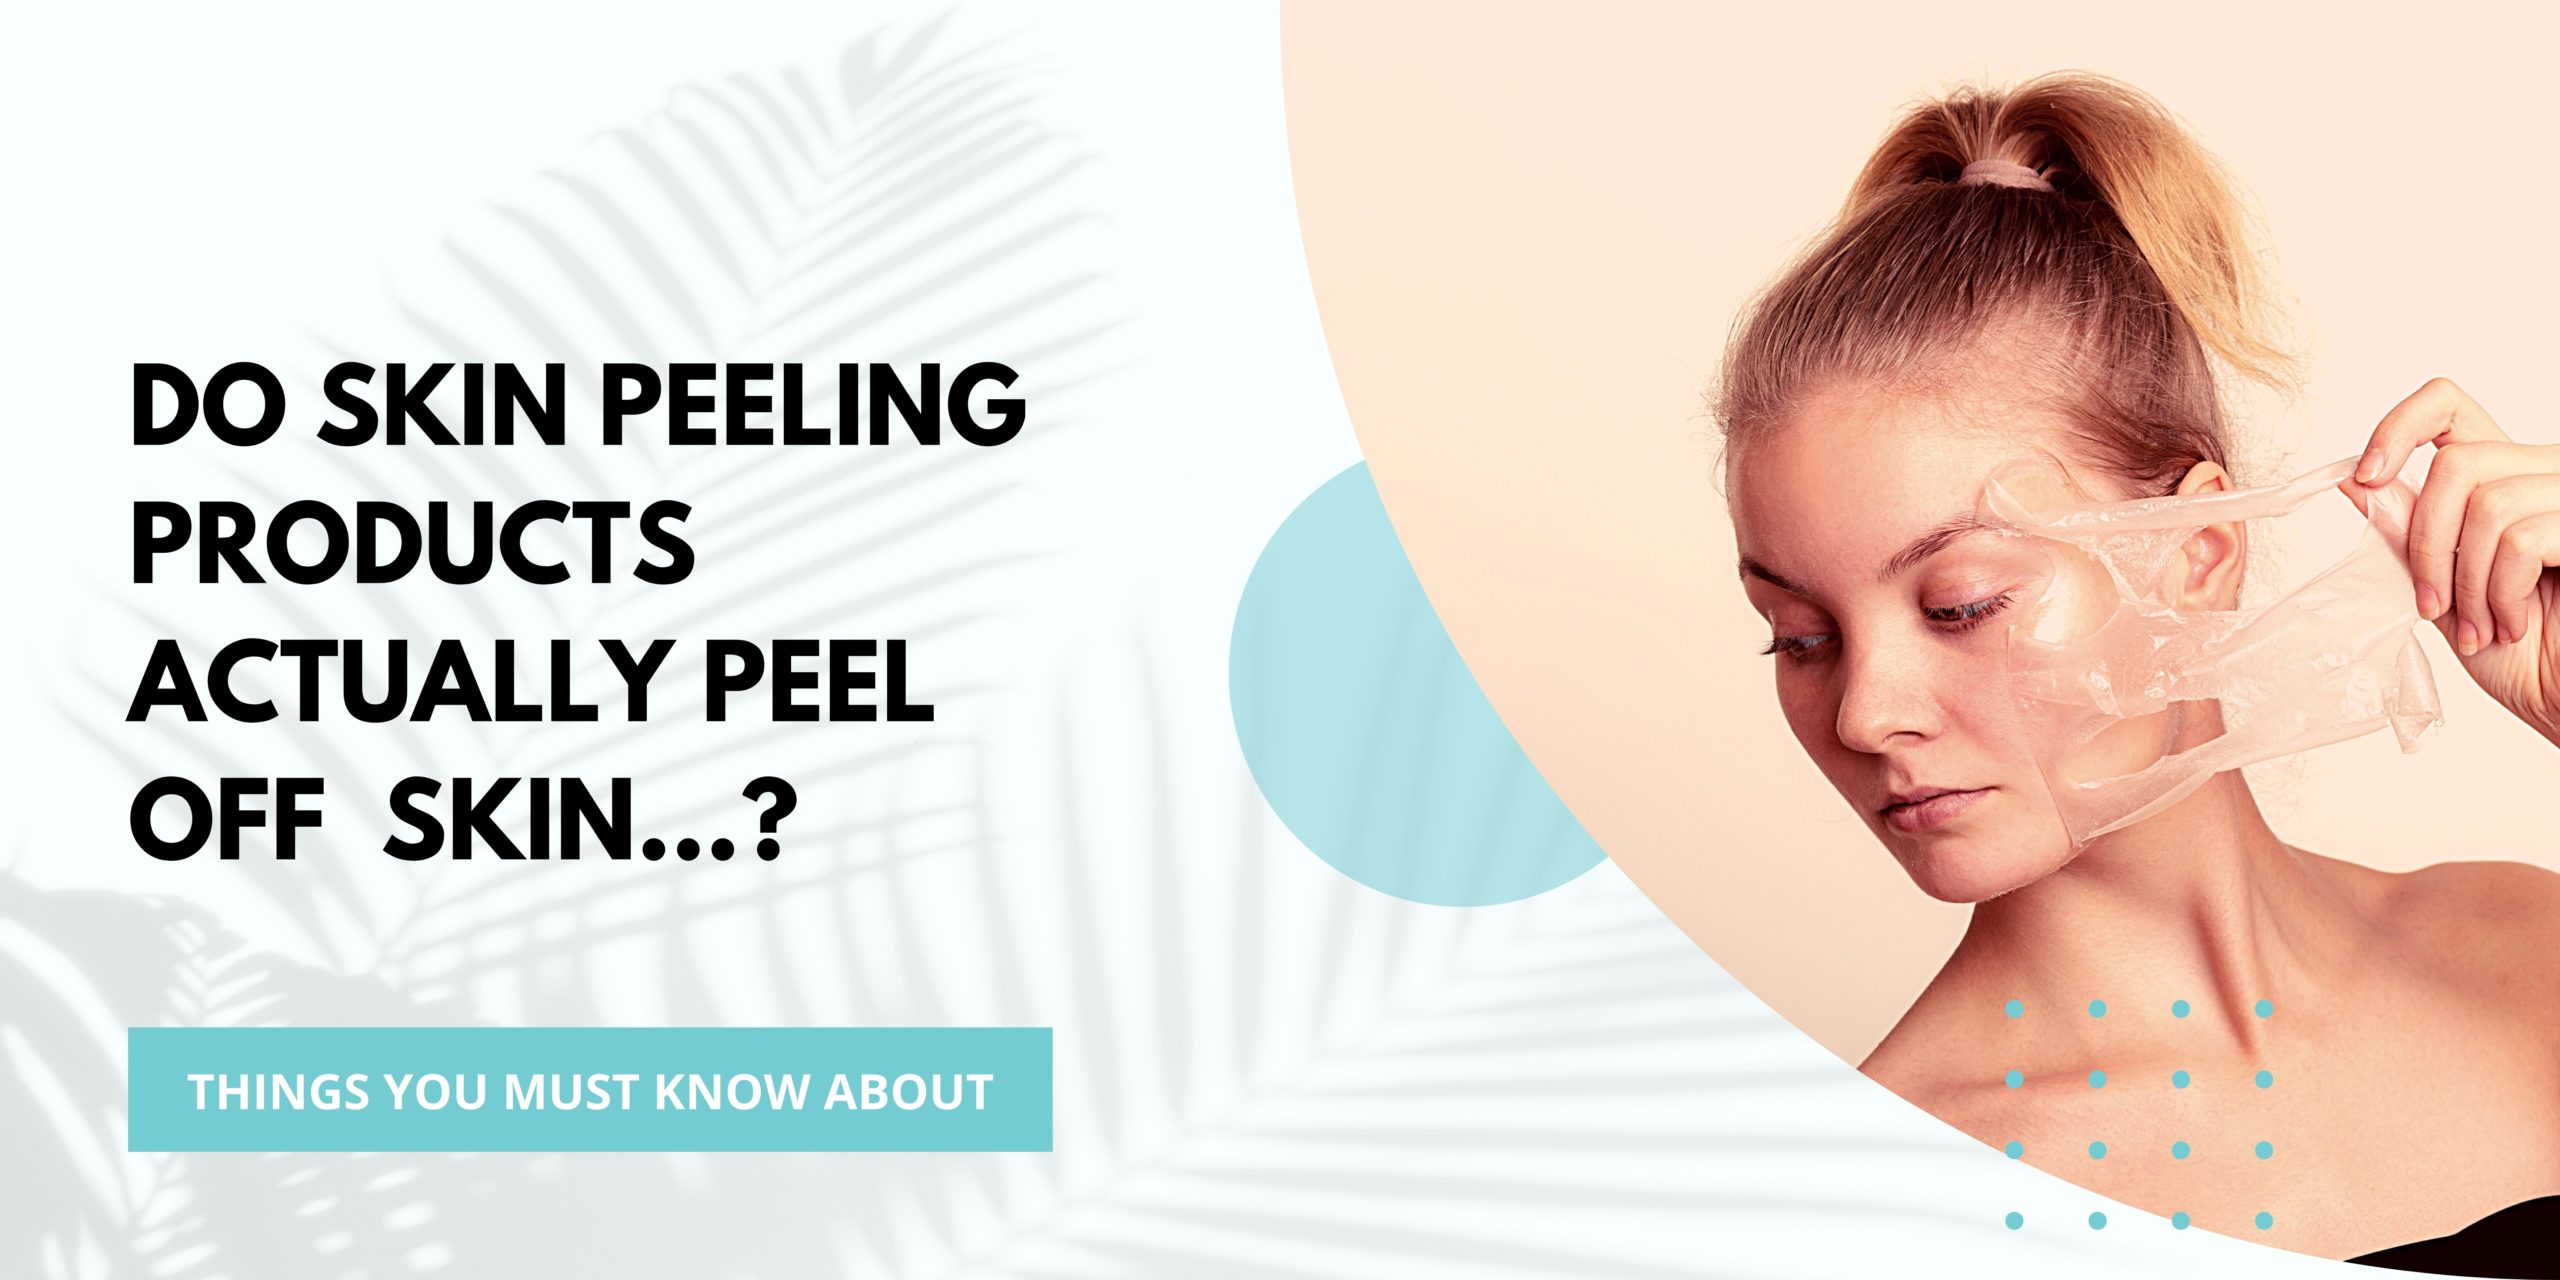 Do SKIN Peeling products ACTually peel off skin...?